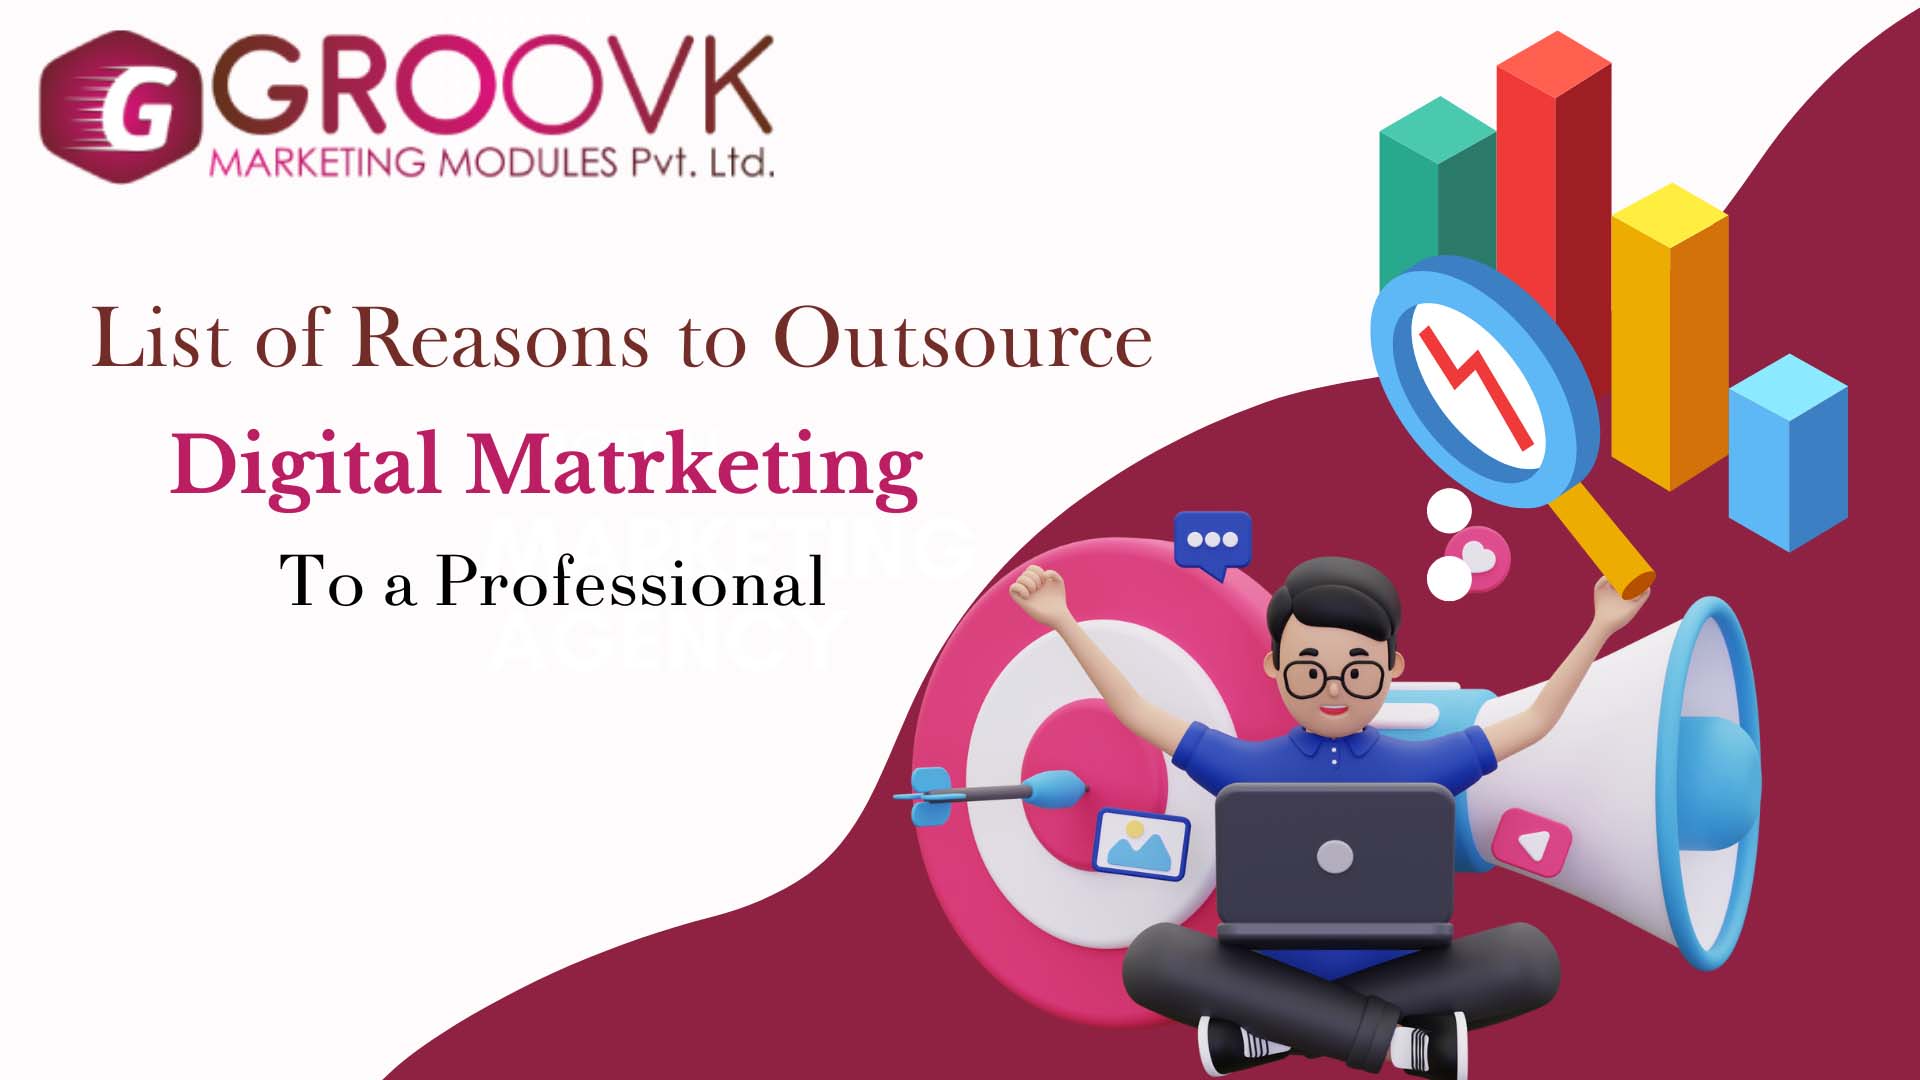 List of Reasons to Outsource Digital Marketing to a Professional Agency in India